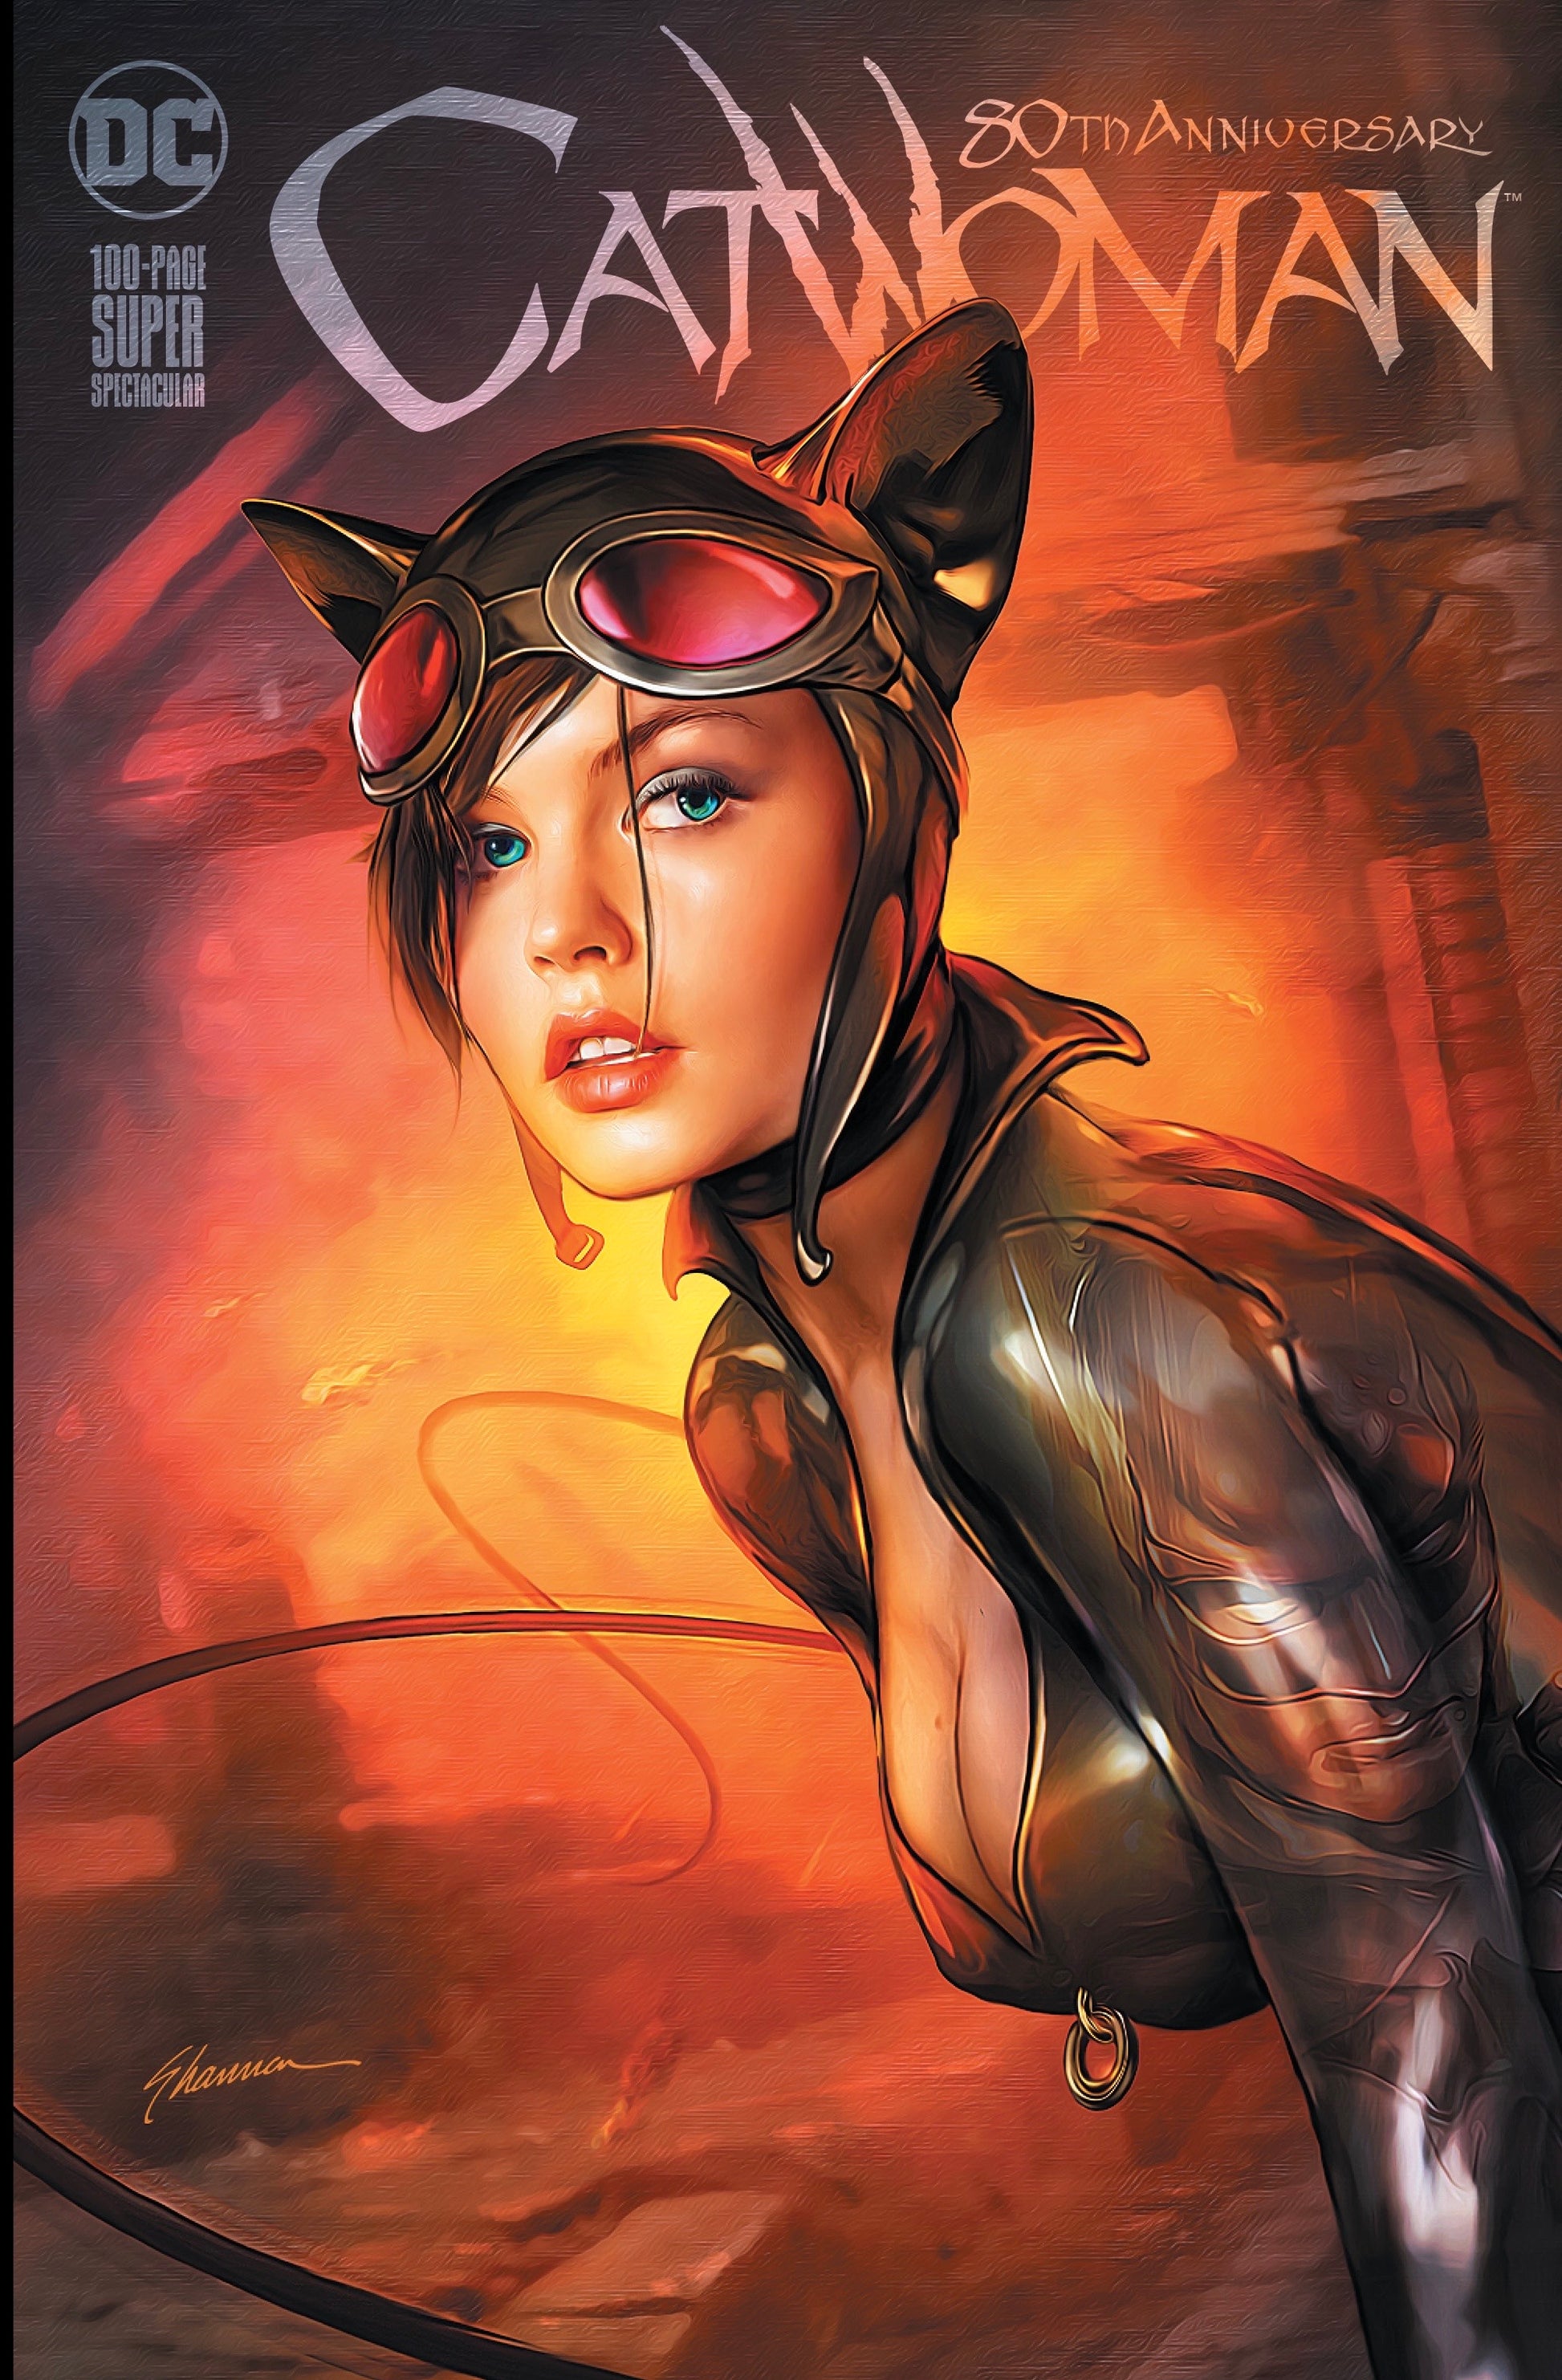 CATWOMAN 80TH ANNIVERSARY SHANNON MAER VARIANT LIMITED TO 2000